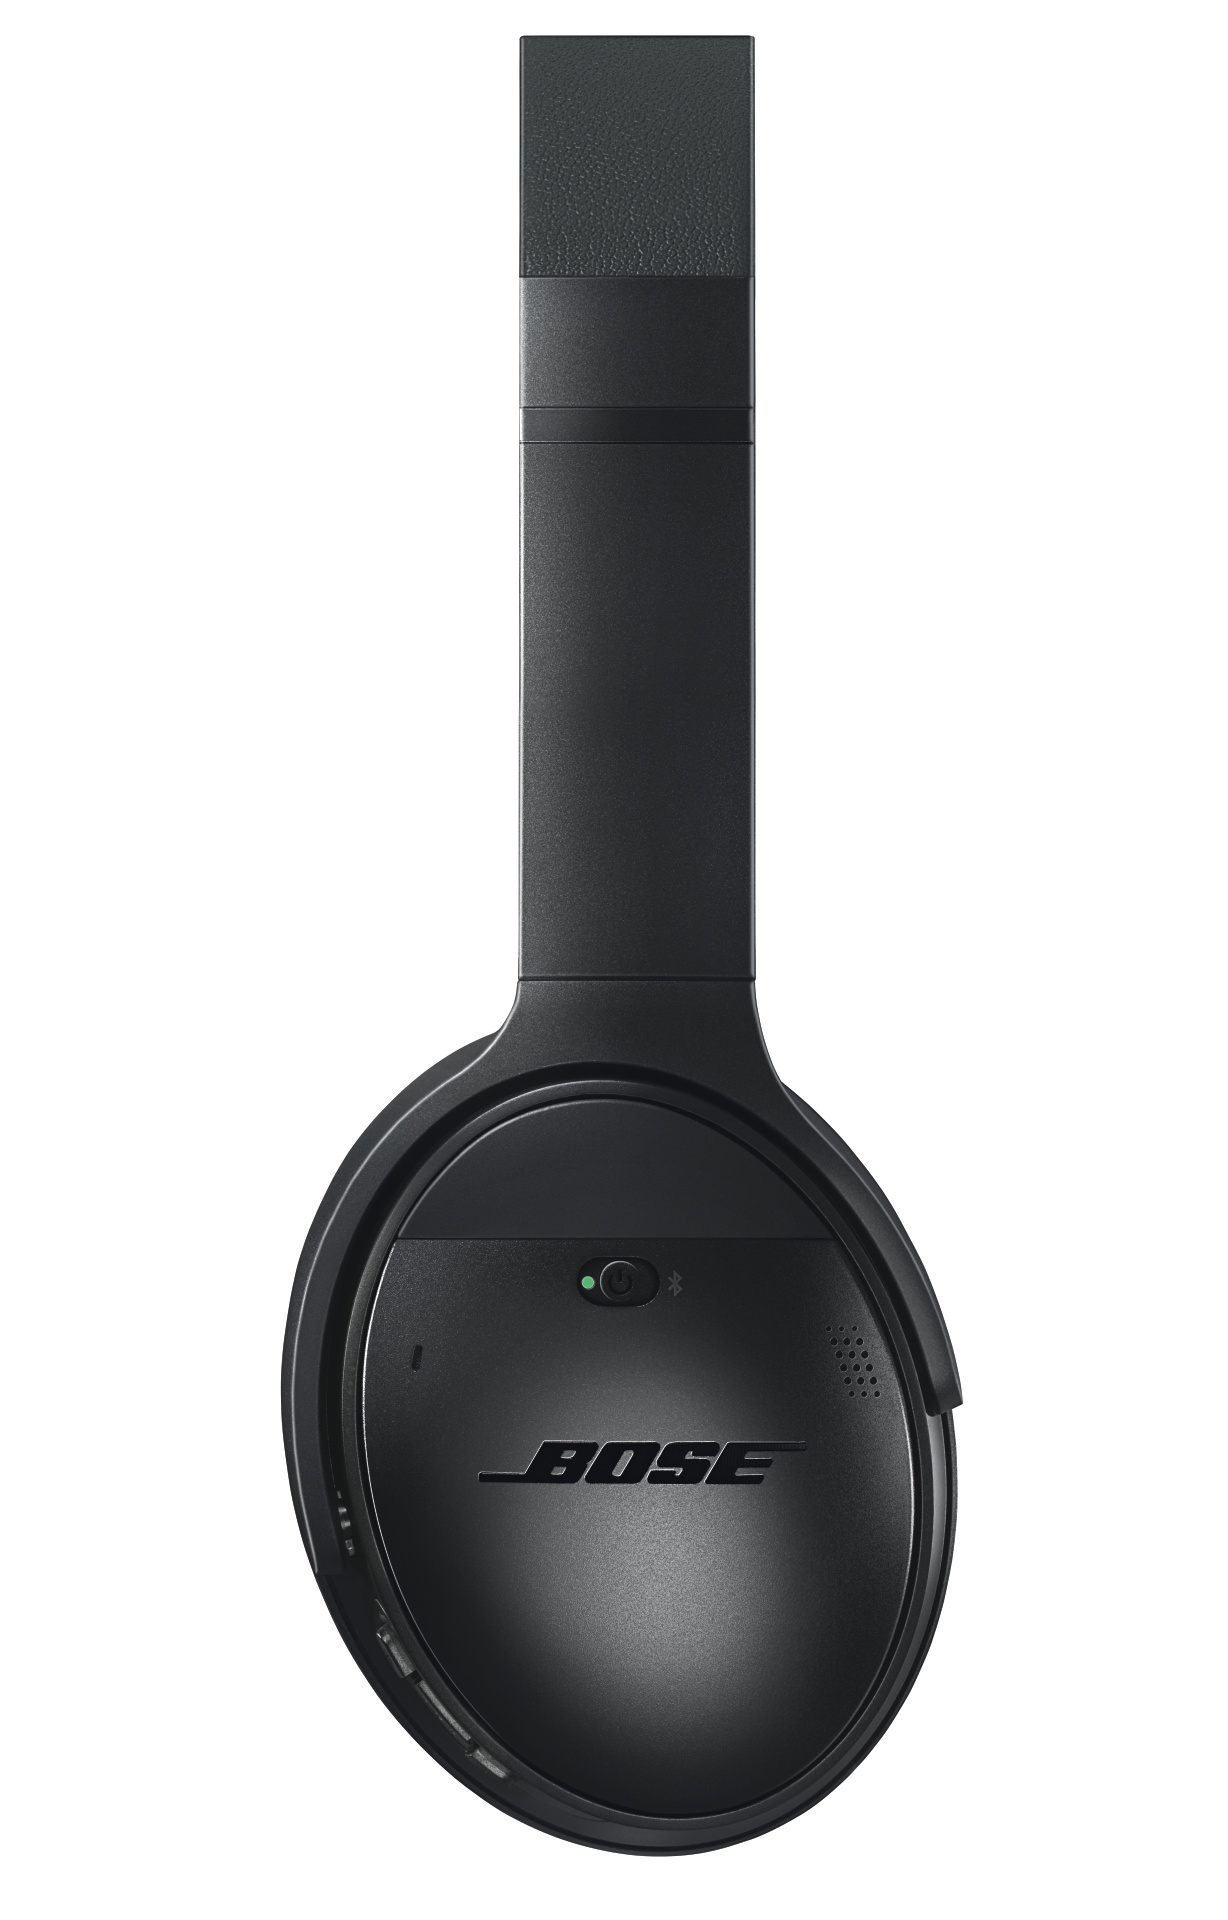 Bose QuietComfort 35 Noise Cancelling Bluetooth Over-Ear Wireless Headphones, Black - image 7 of 8